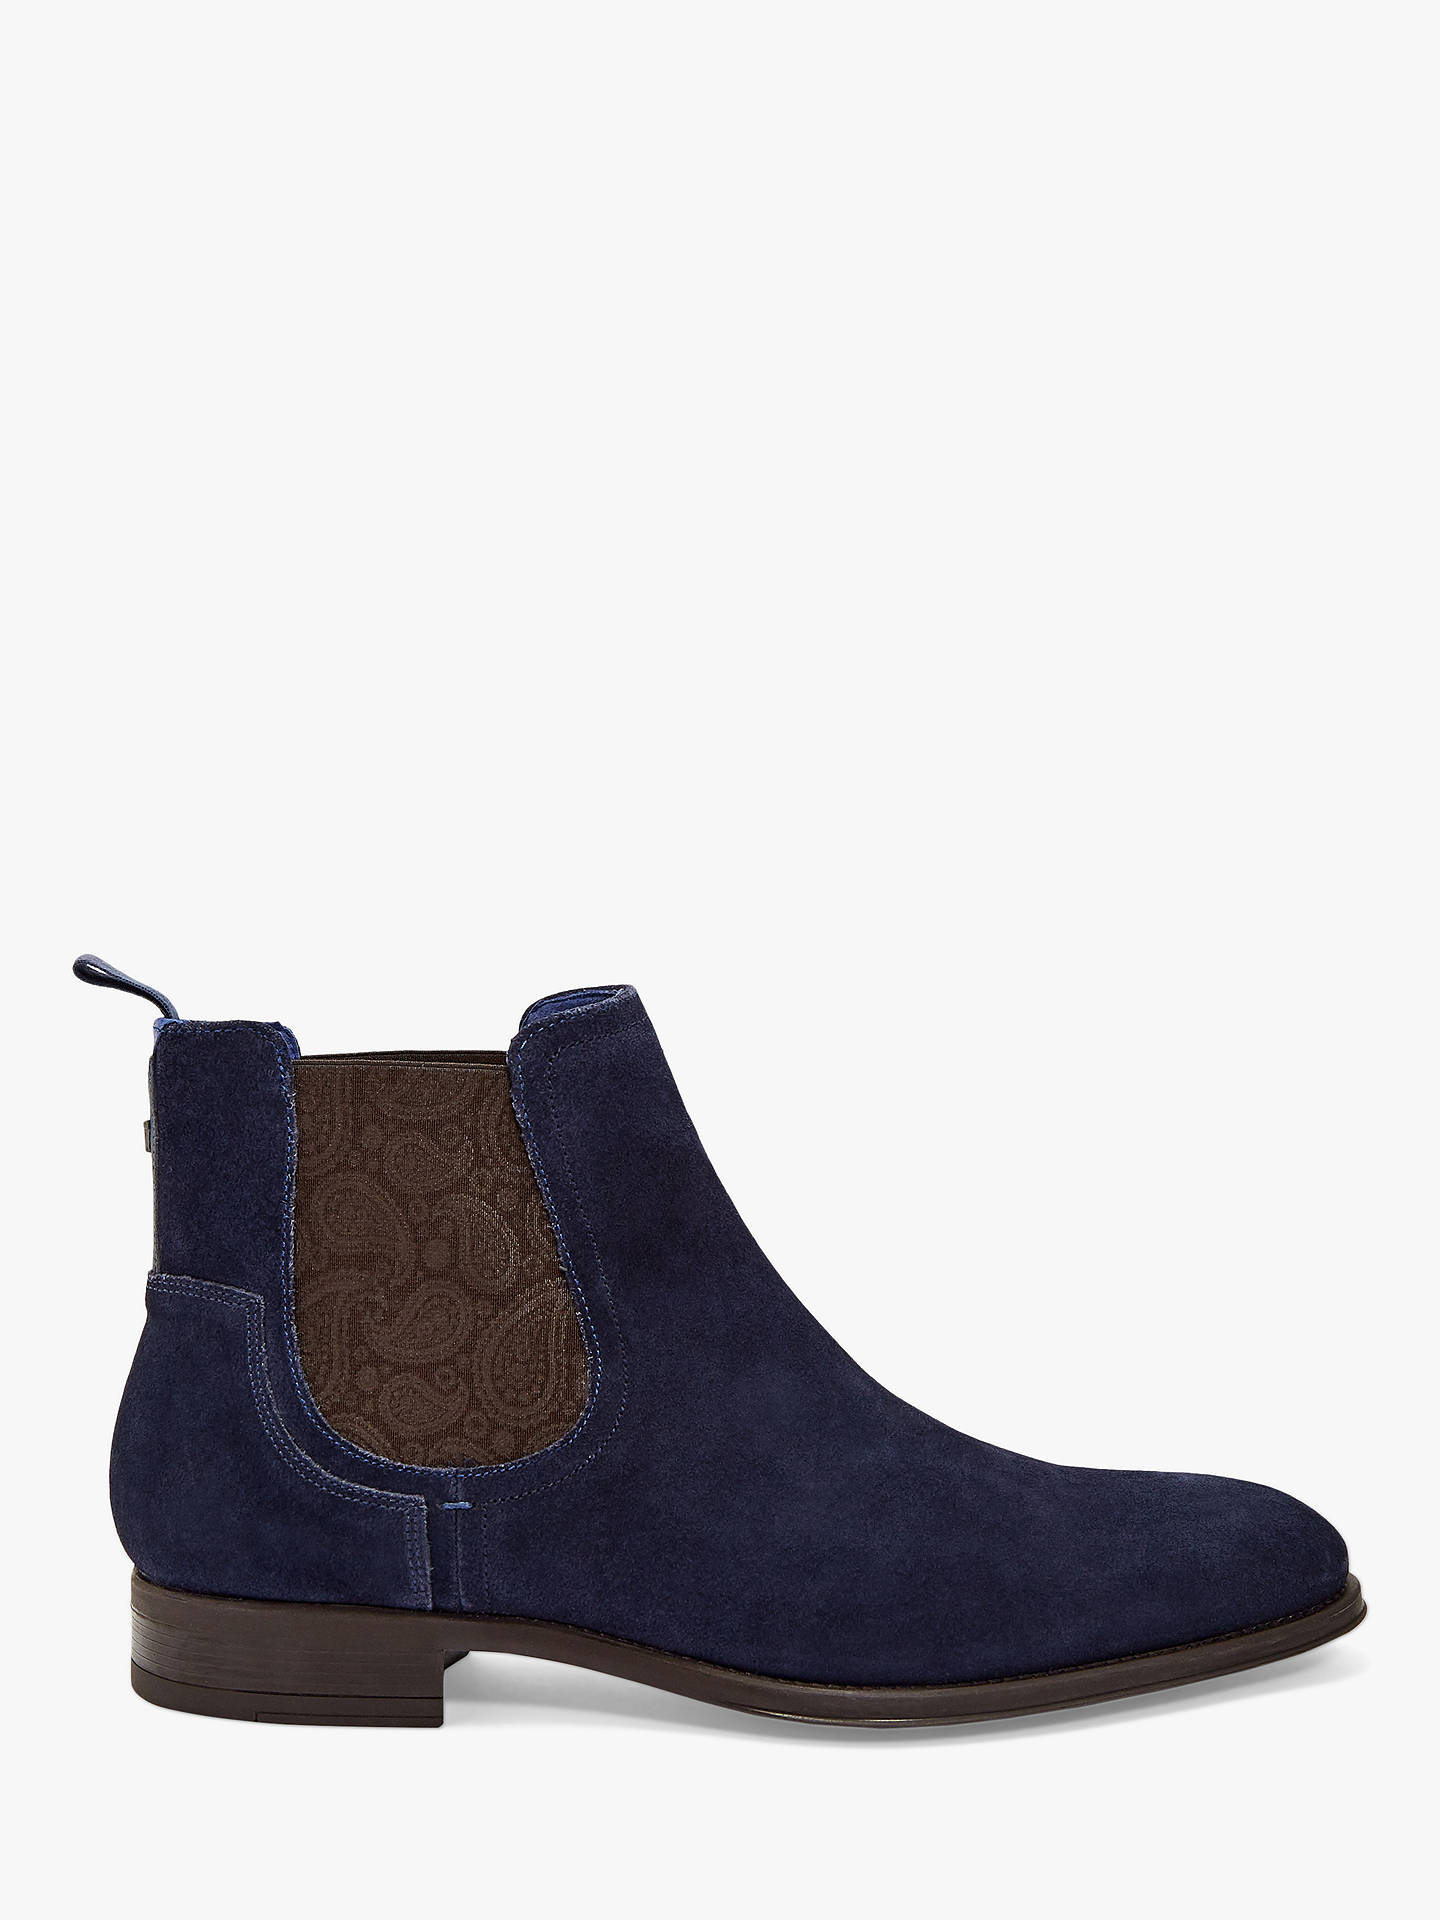 Ted Baker Travic Paisley Suede Chelsea Boots, Dark Blue at John Lewis ...